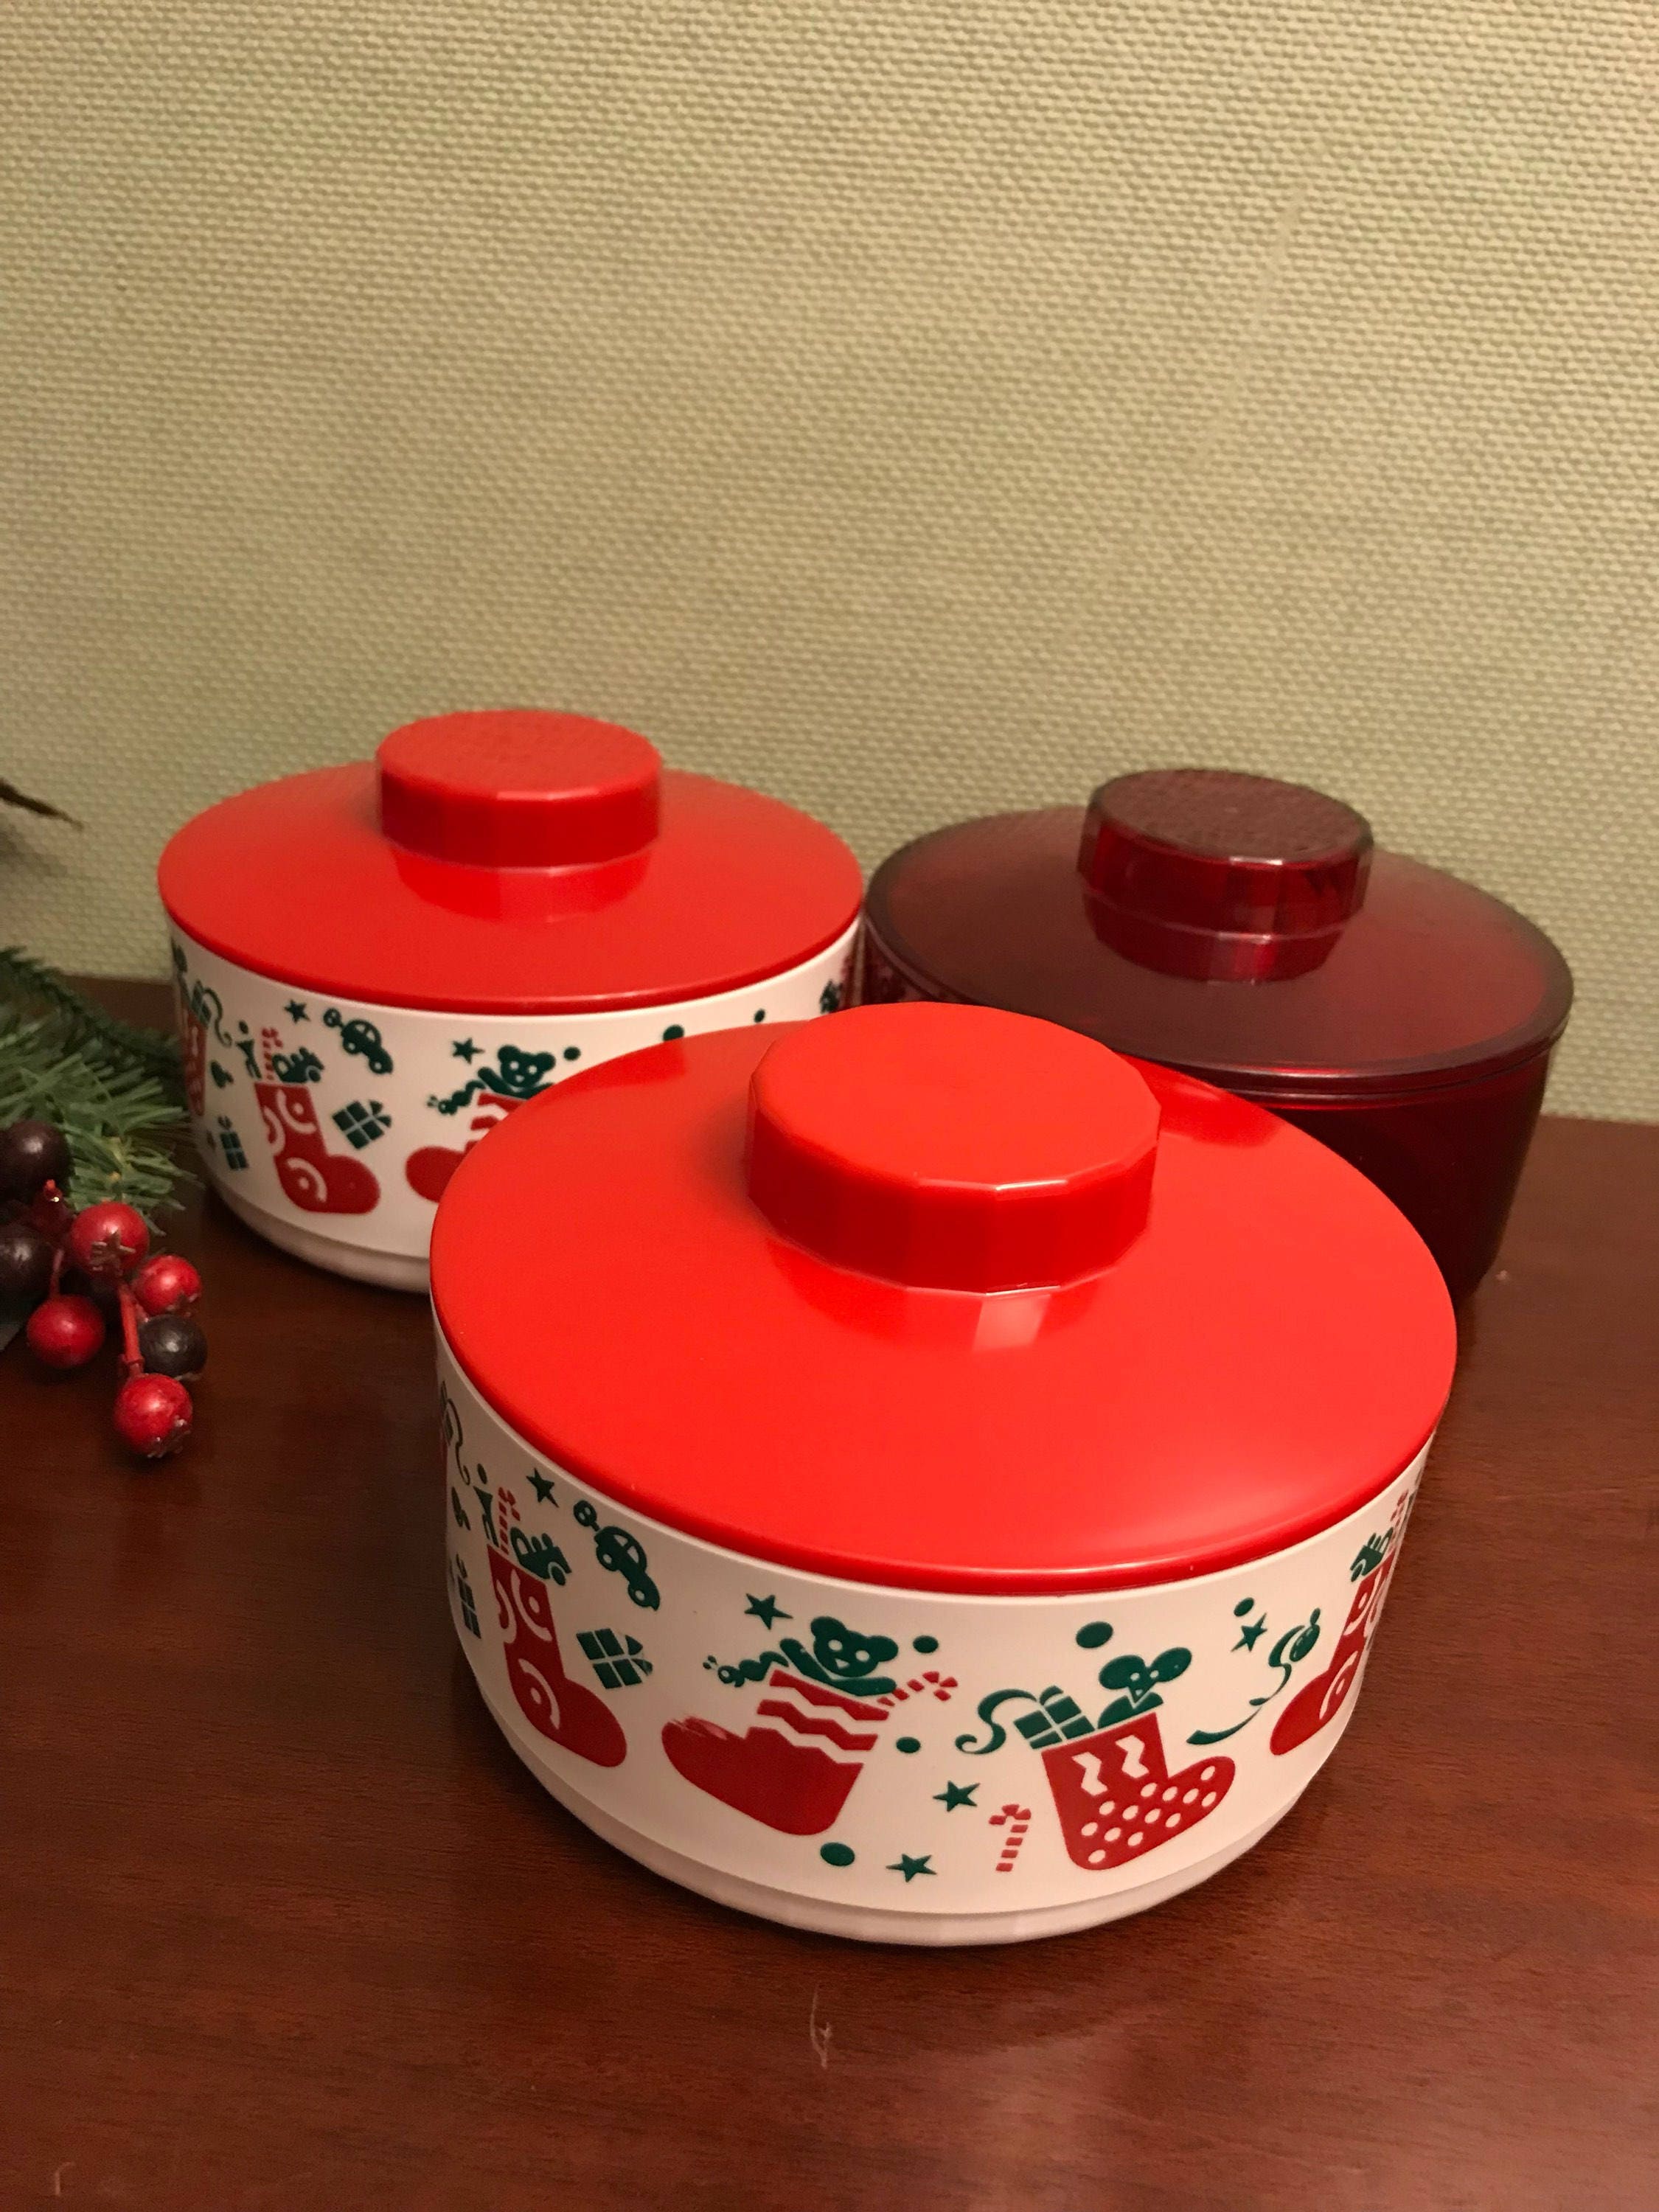 .TUPPERWARE 16Pc. HOLIDAY SET RED/WHITE.😊FREE SHIPPING😊